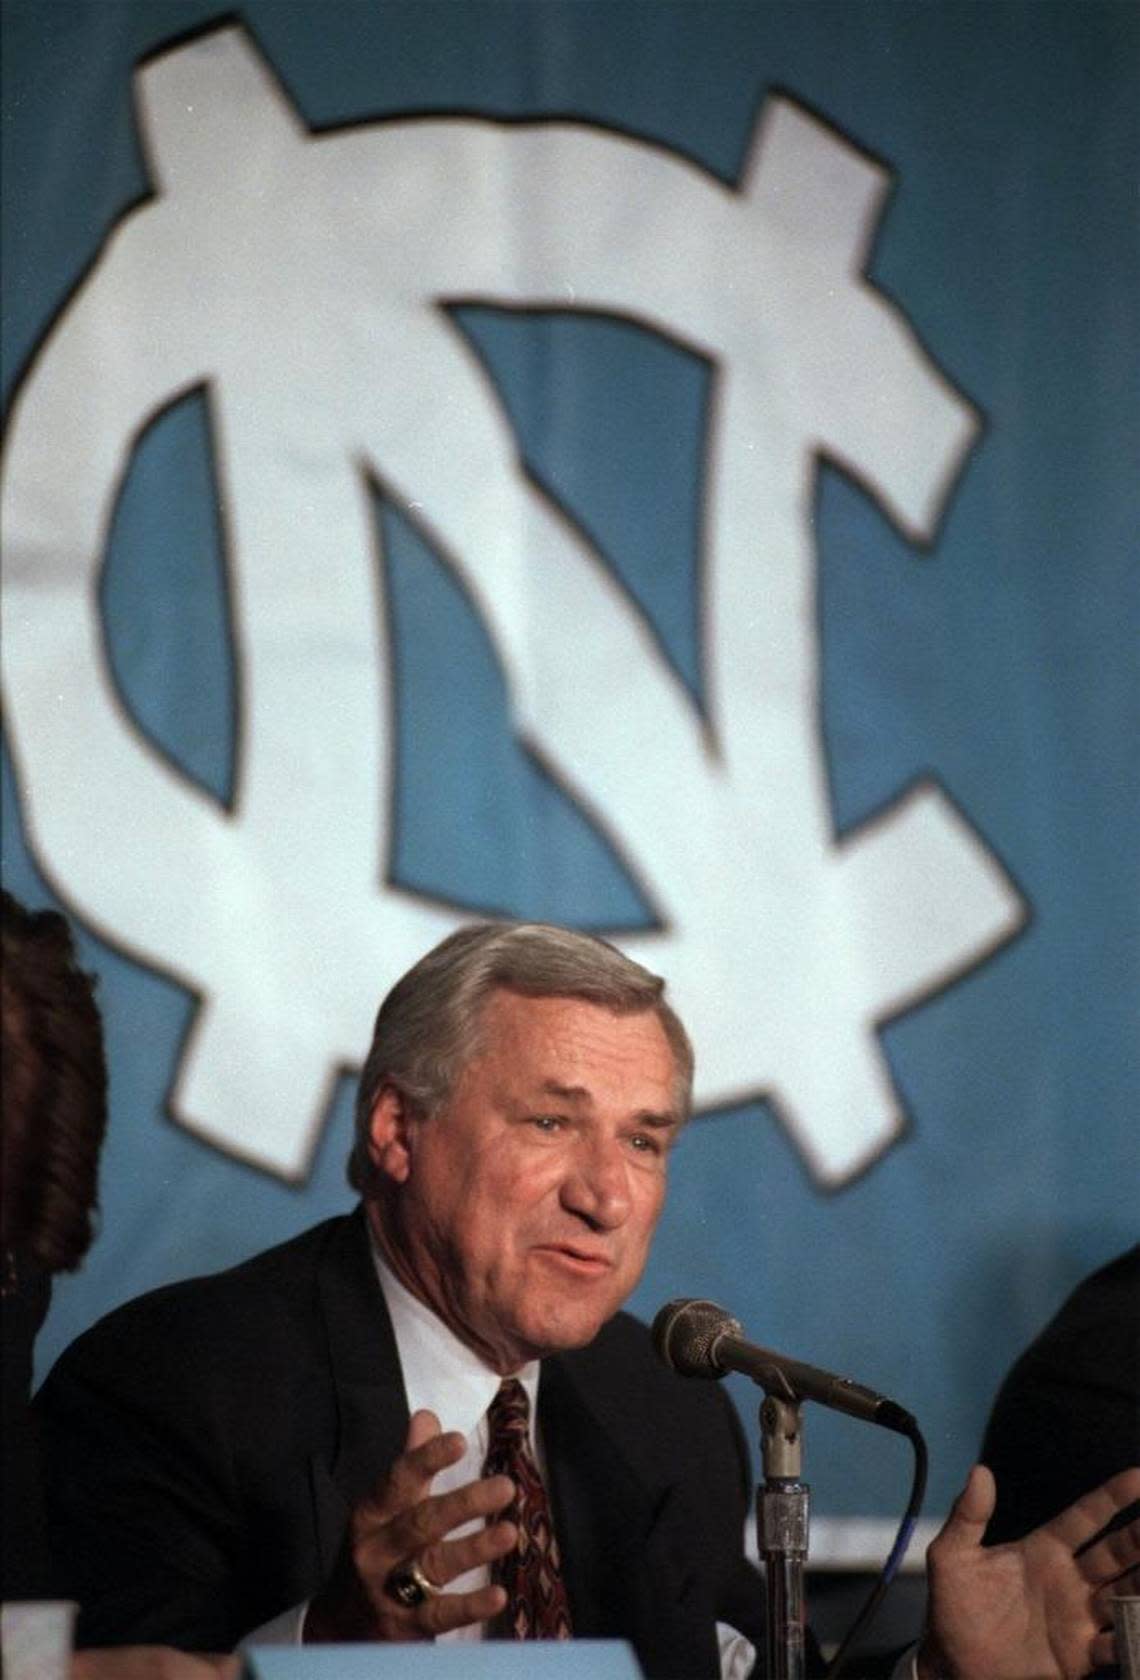 Dean Smith talks about why he decided to resign as head basketball coach at UNC during a press conference in Chapel Hill on Oct. 10, 1997.